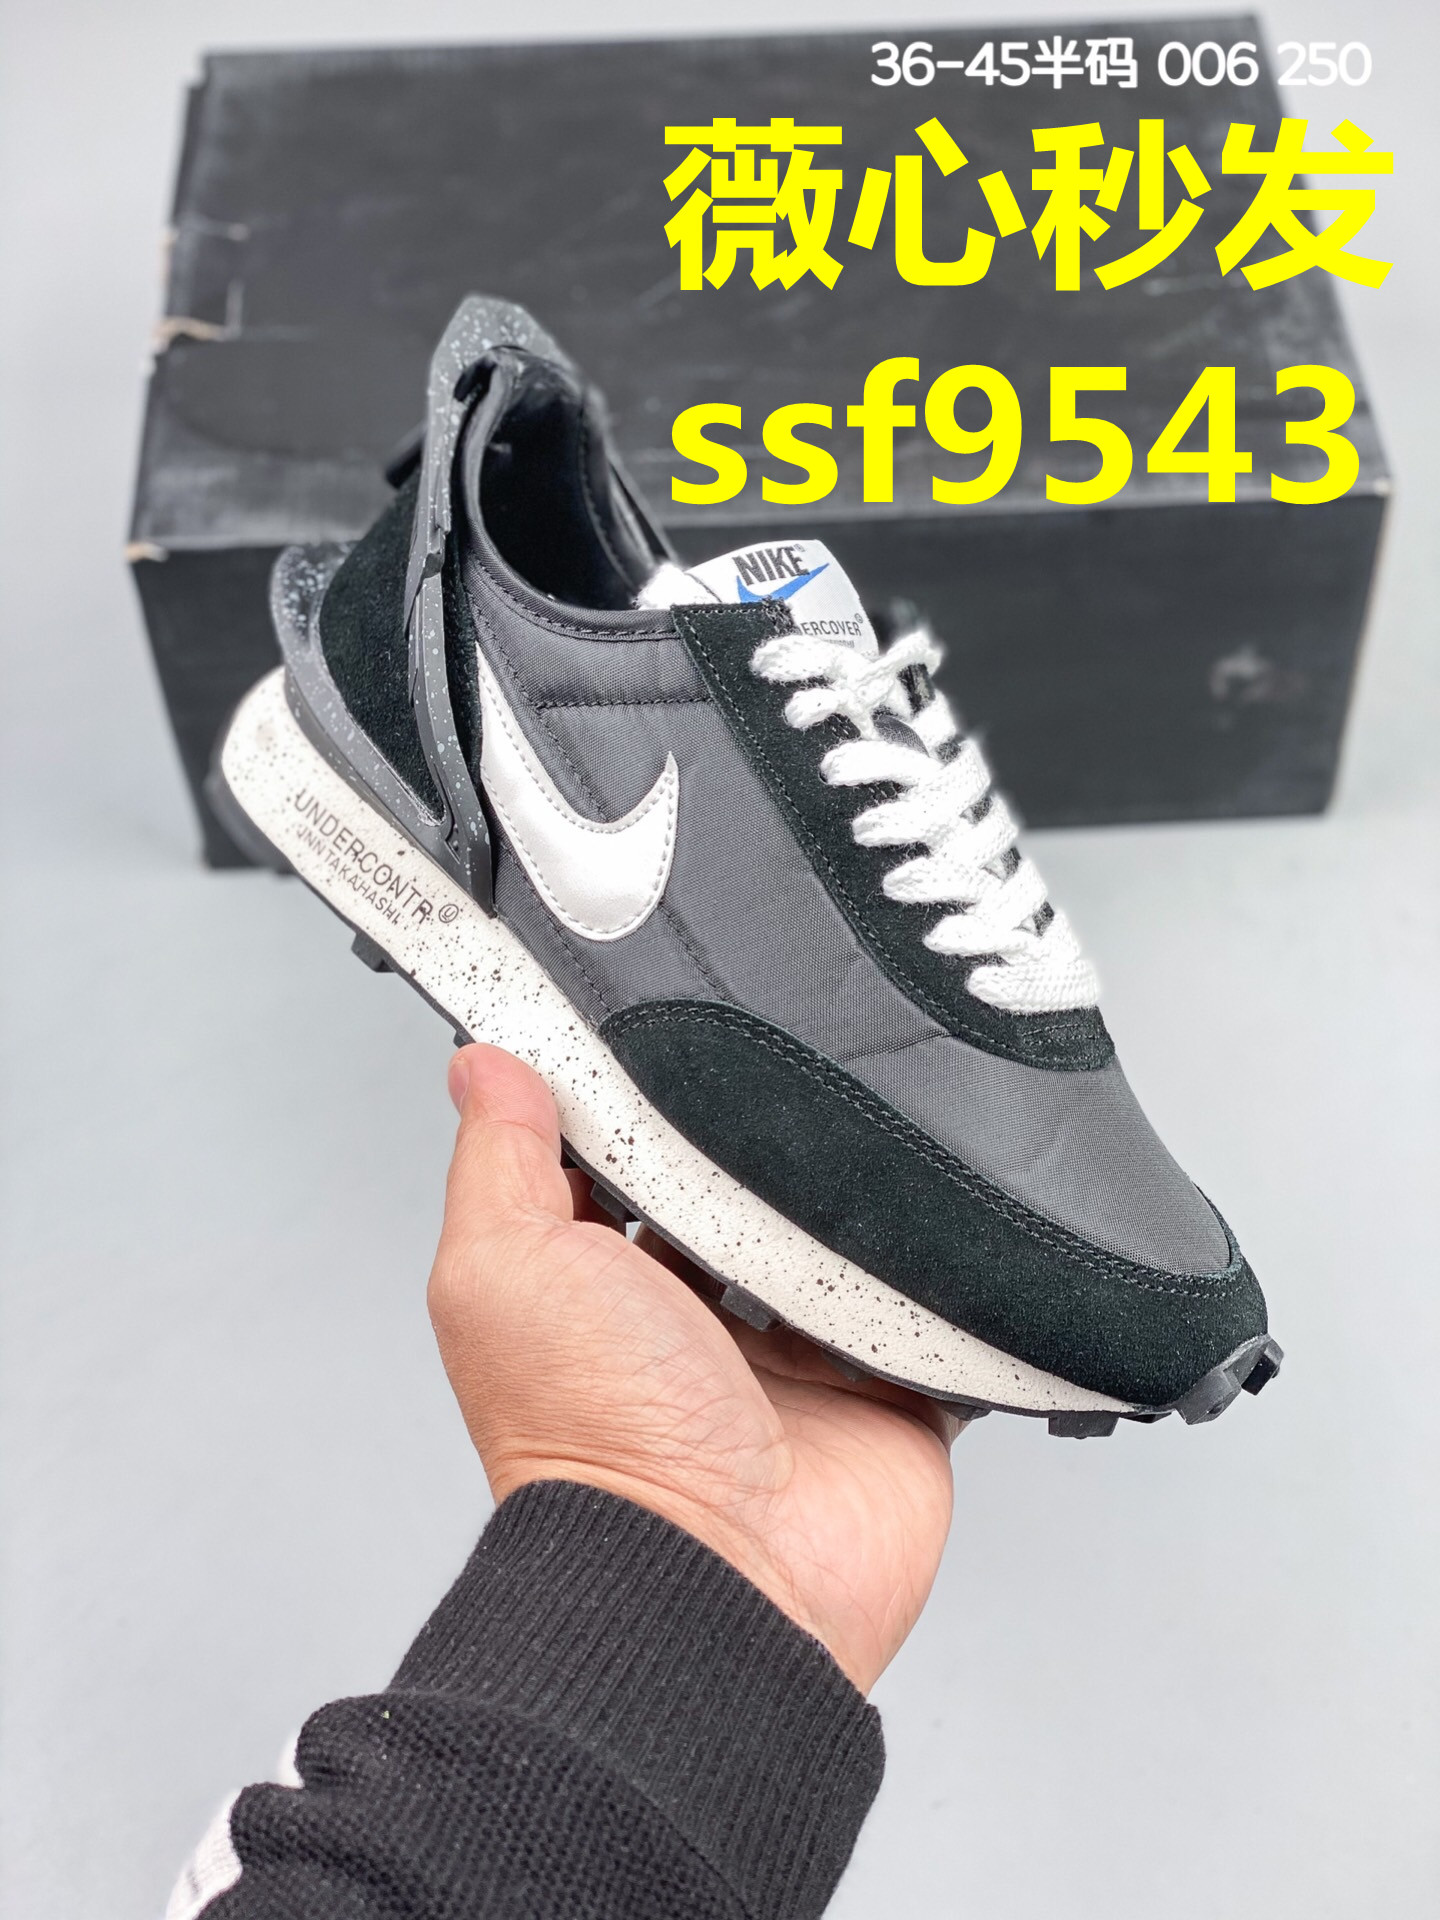 Blue2020 winter new pattern Olive green Men's Shoes Women's Shoes Star of the same style black and white Mesh surface Casual shoes Low Gang non-slip Rain shoes